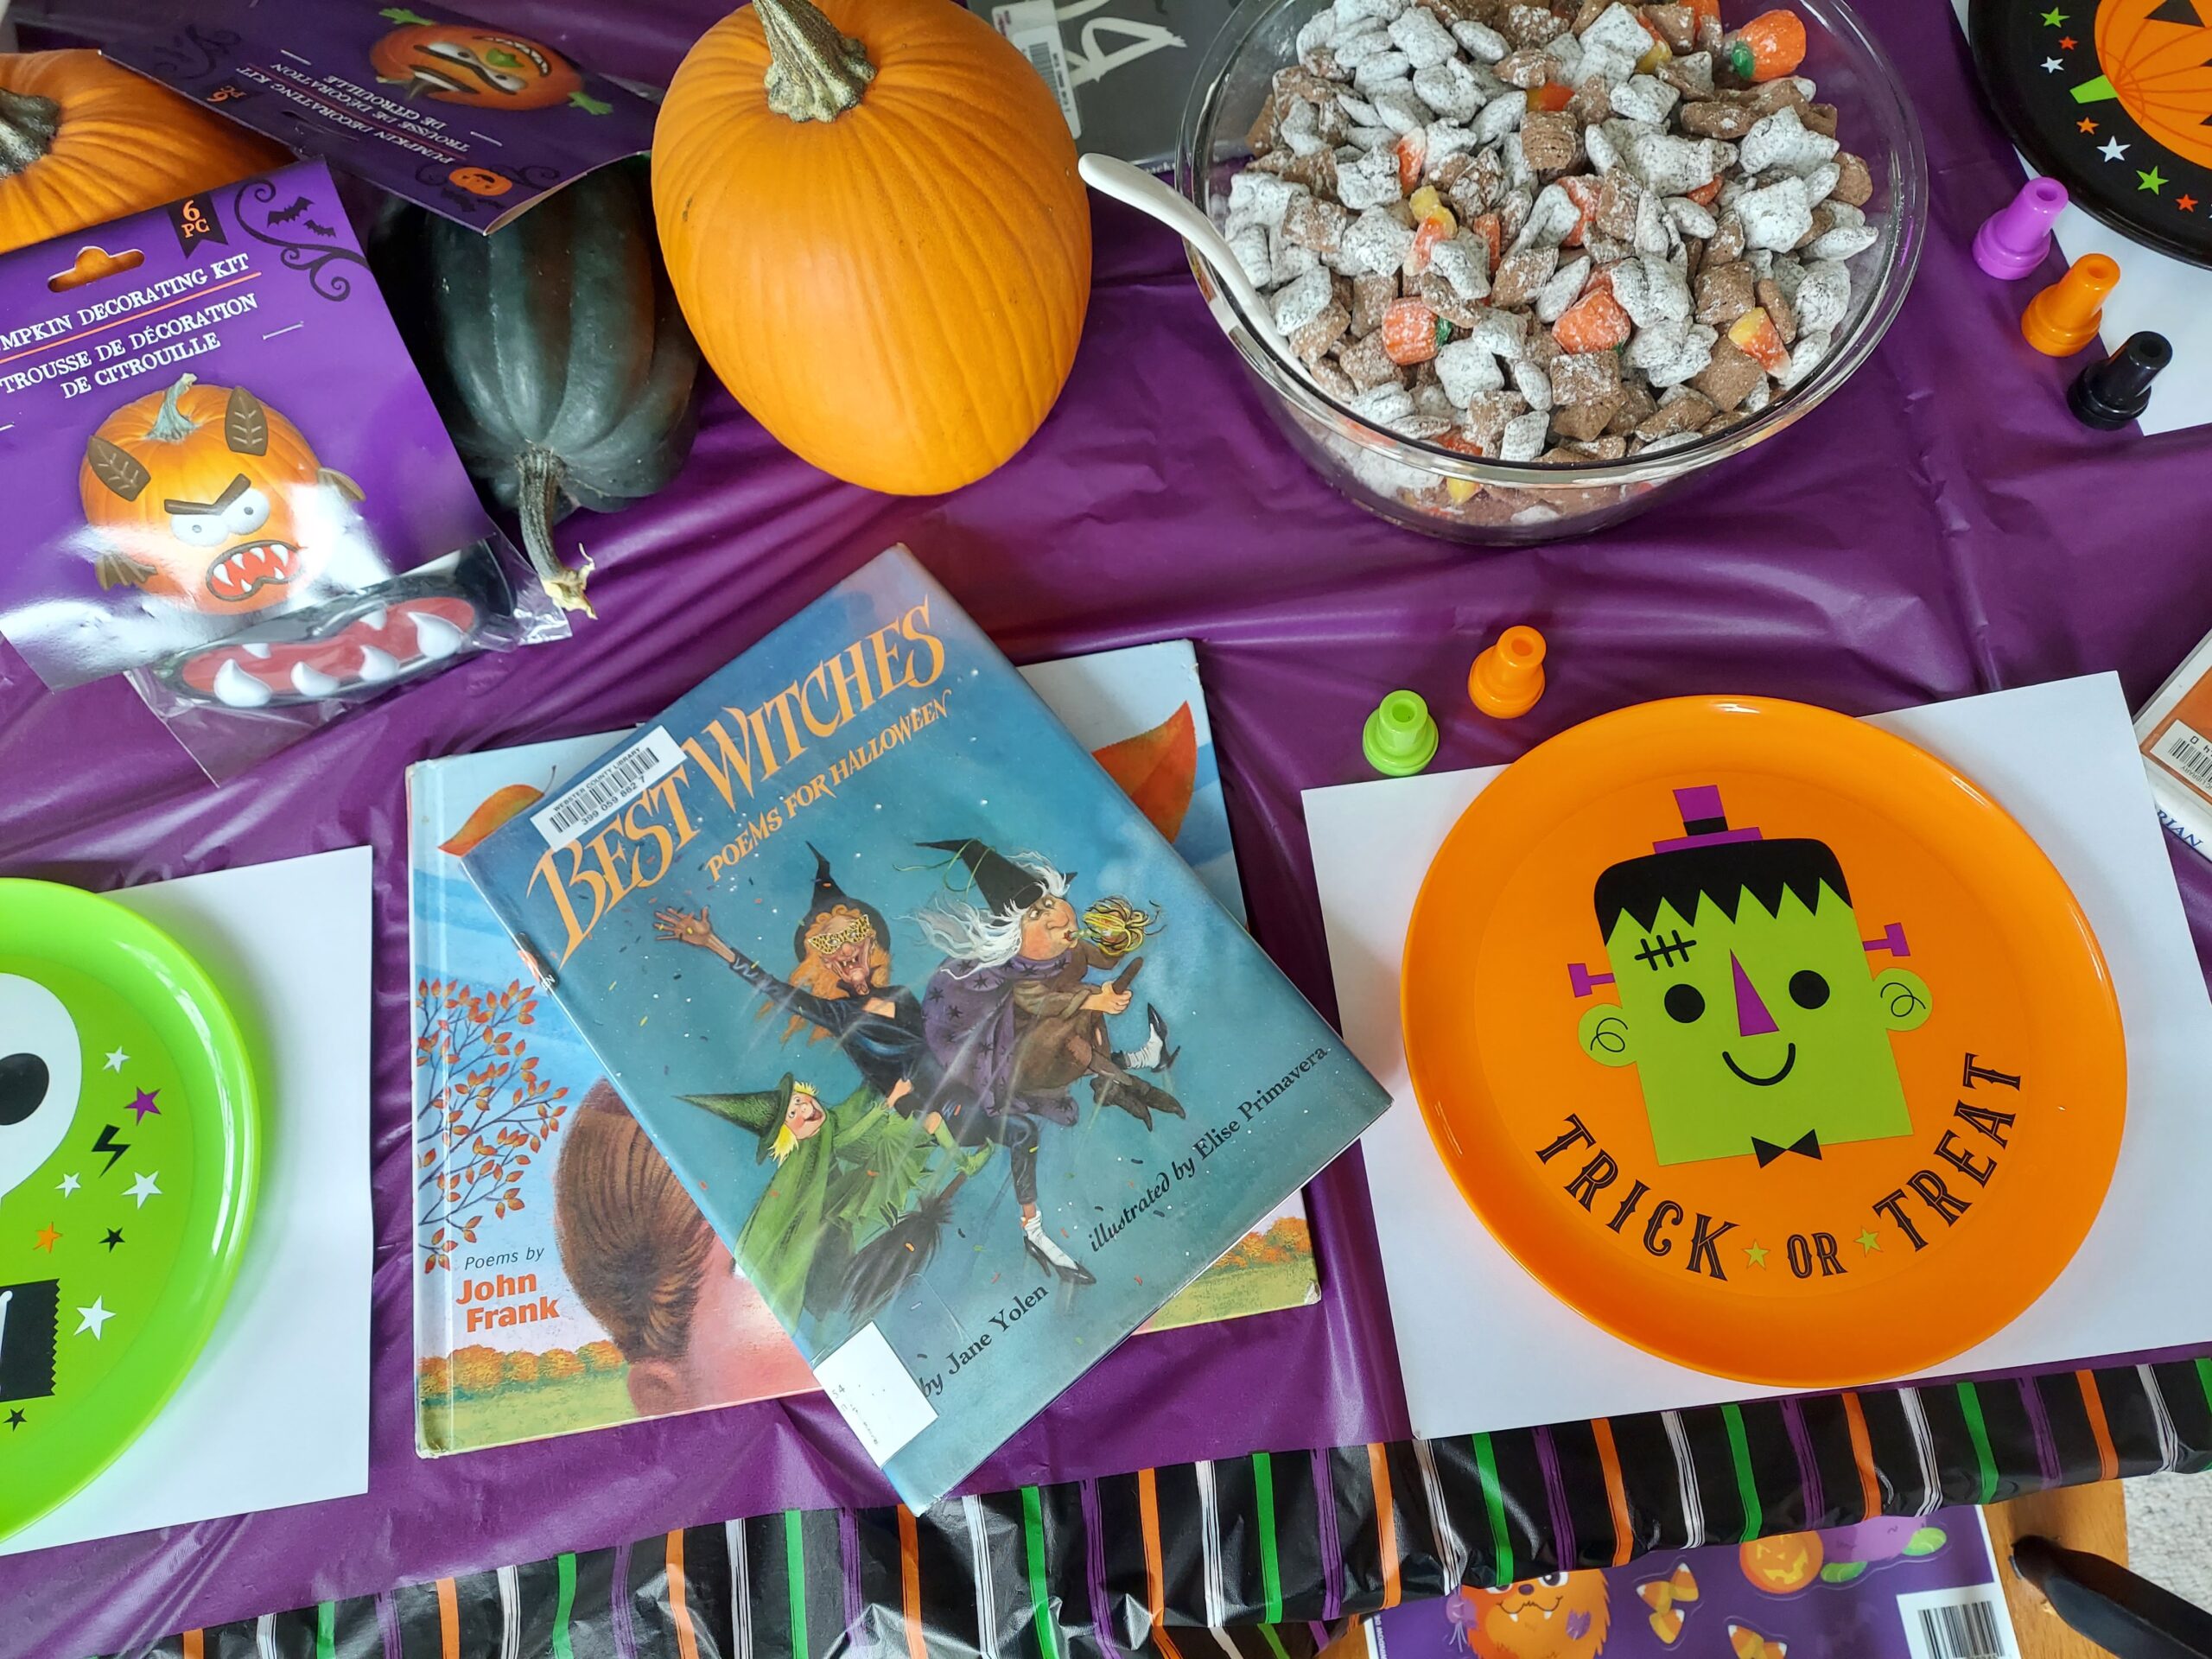 5 Steps for an Exciting Halloween Poetry Party